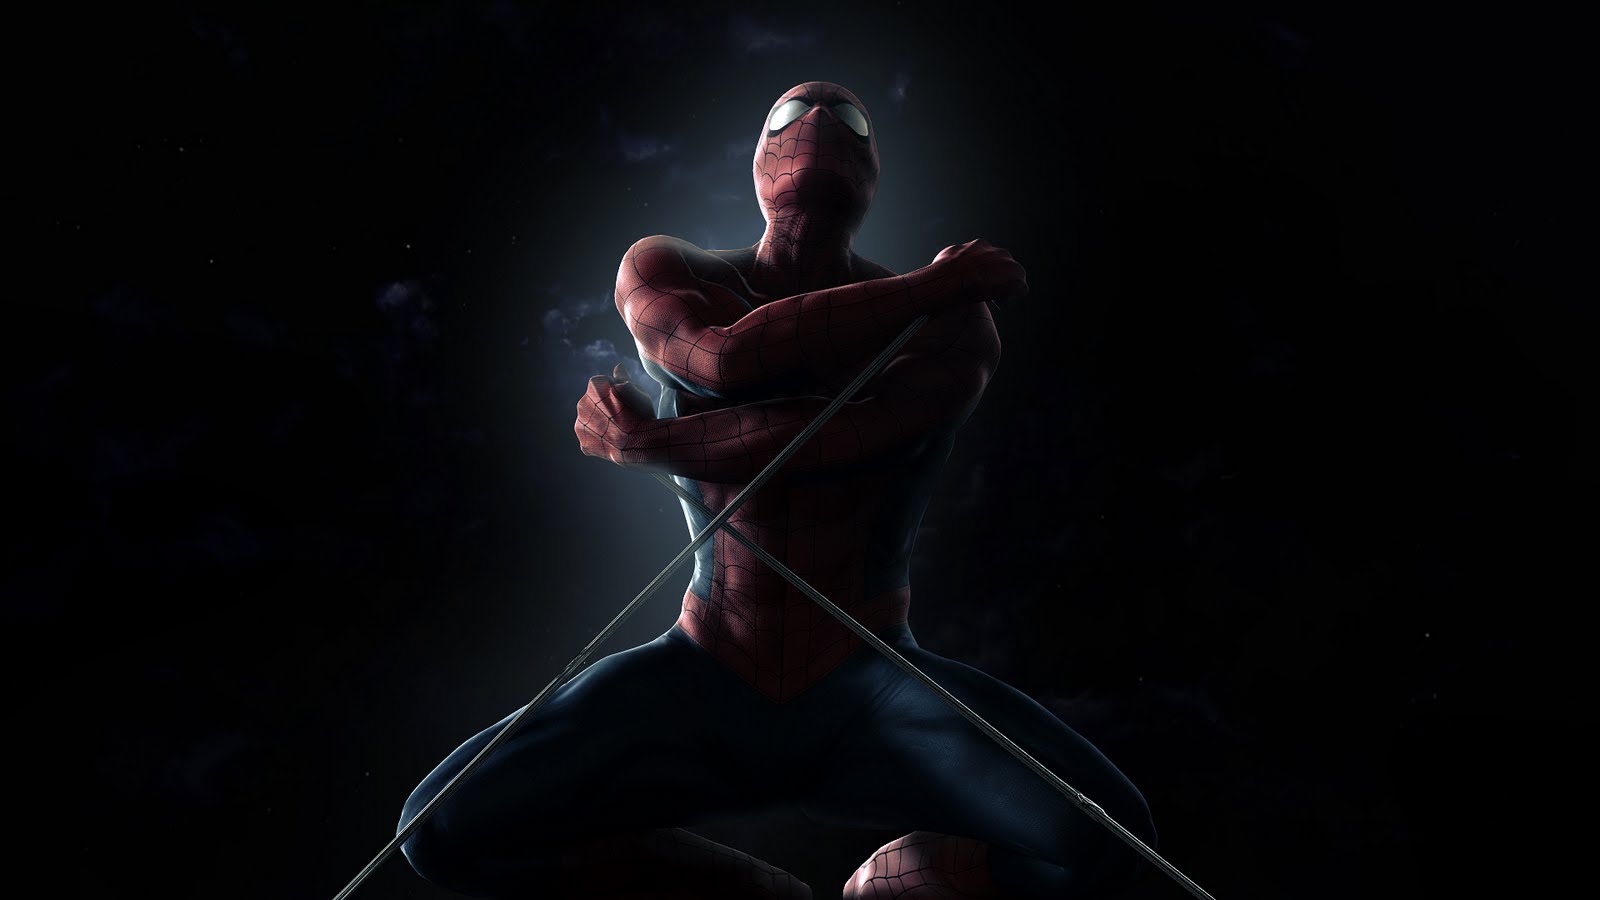 Spiderman Backgrounds